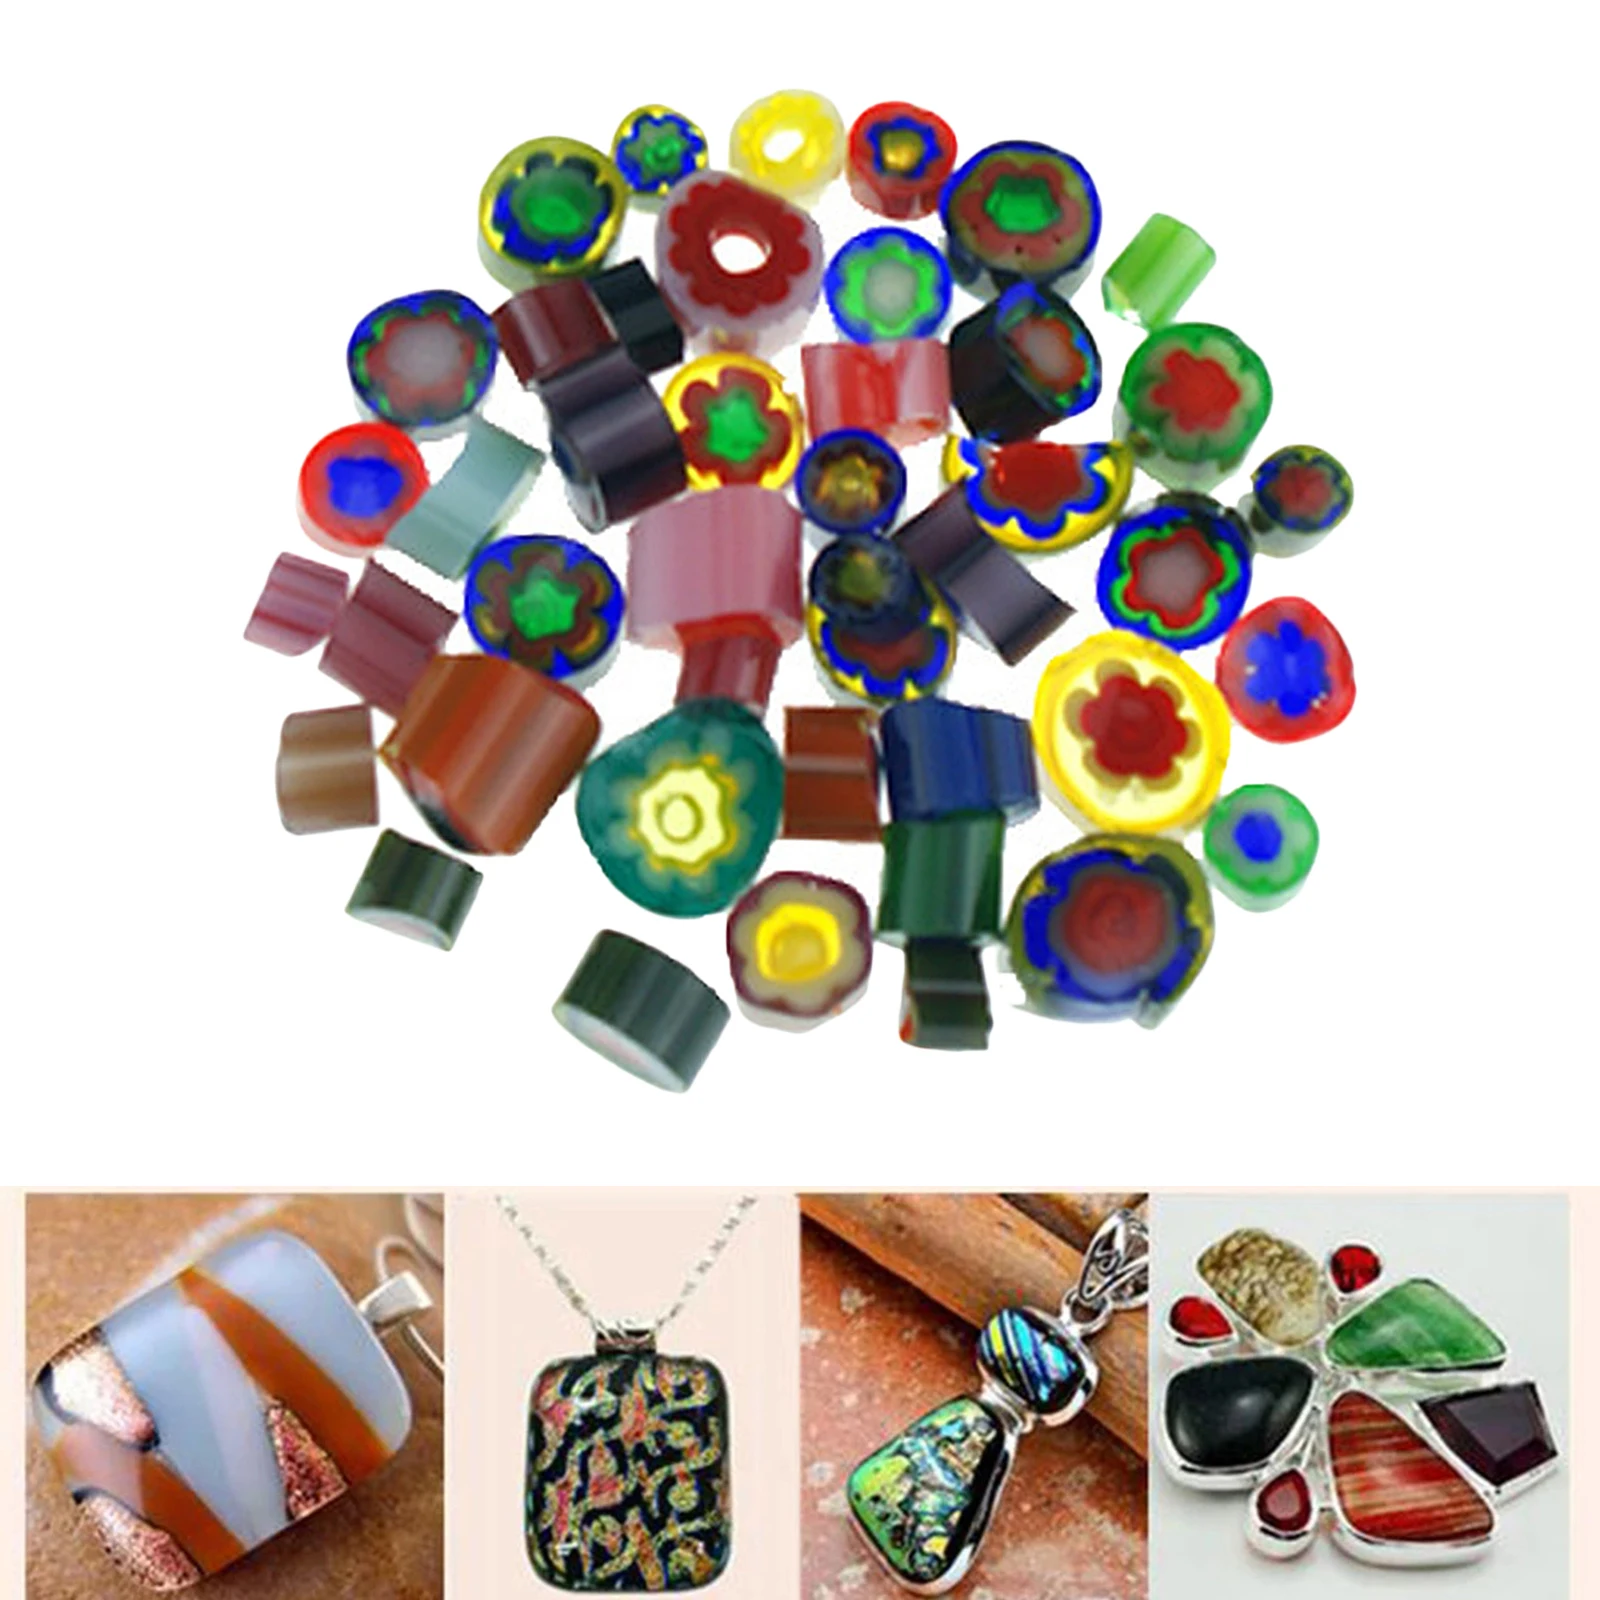 Microwave Kiln Kit Tool Set Stained Glass Fusing Supplies DIY Mixed Glass Jewelry Kiln Tools Handicraft Accessories 28g/Set